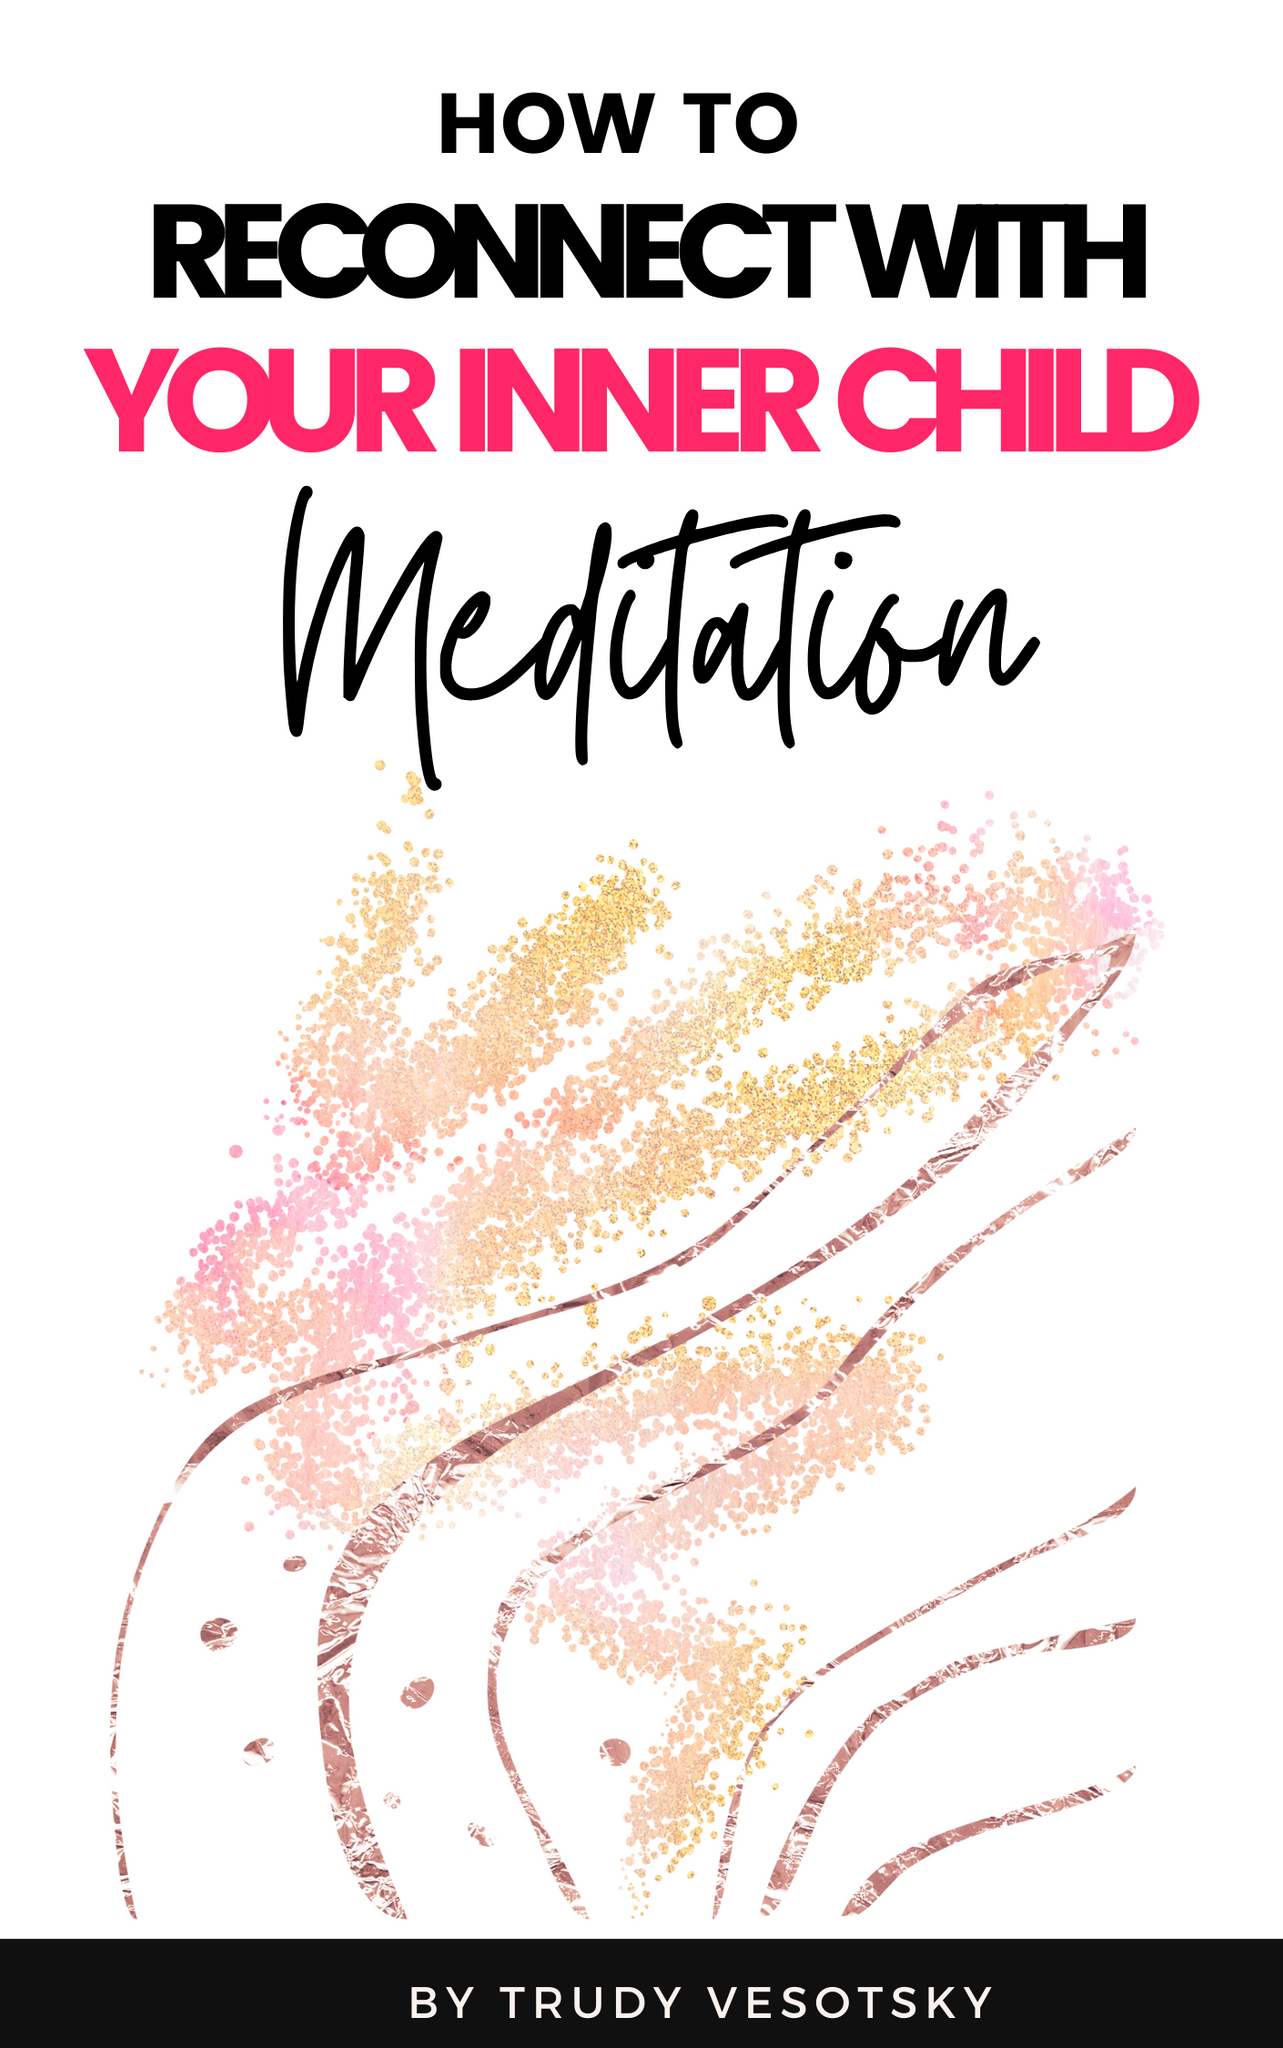 Reconnect with Your Inner Child - 40 minute meditation